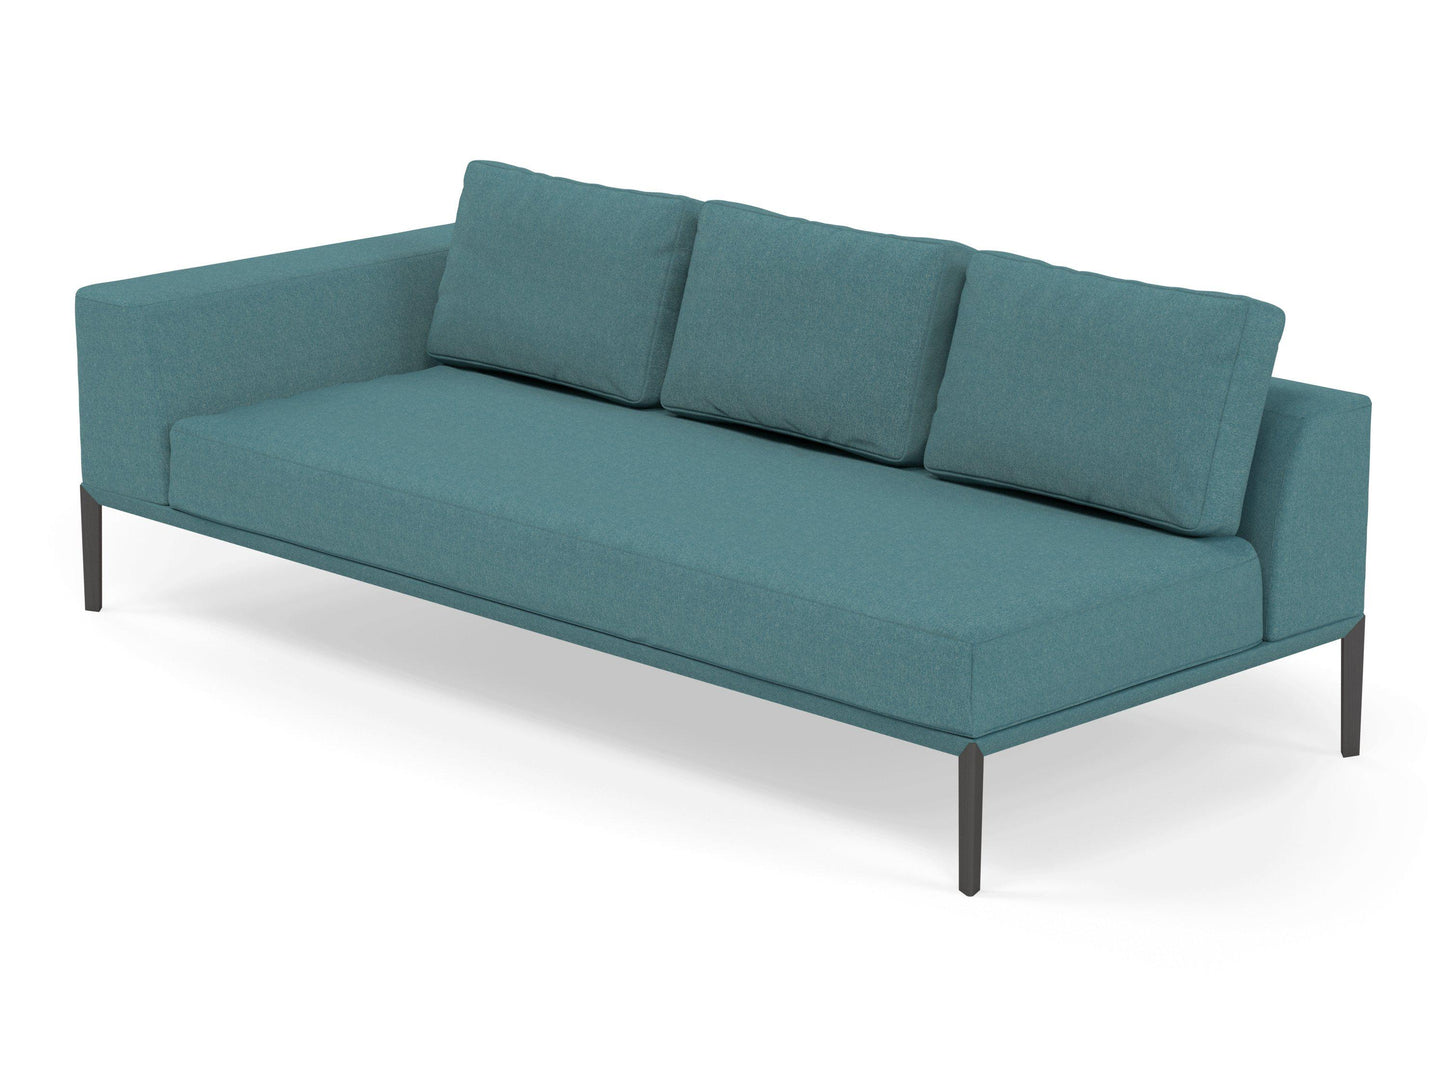 Modern 3 Seater Chaise Lounge Style Sofa with Right Armrest in Teal Blue Fabric-Distinct Designs (London) Ltd